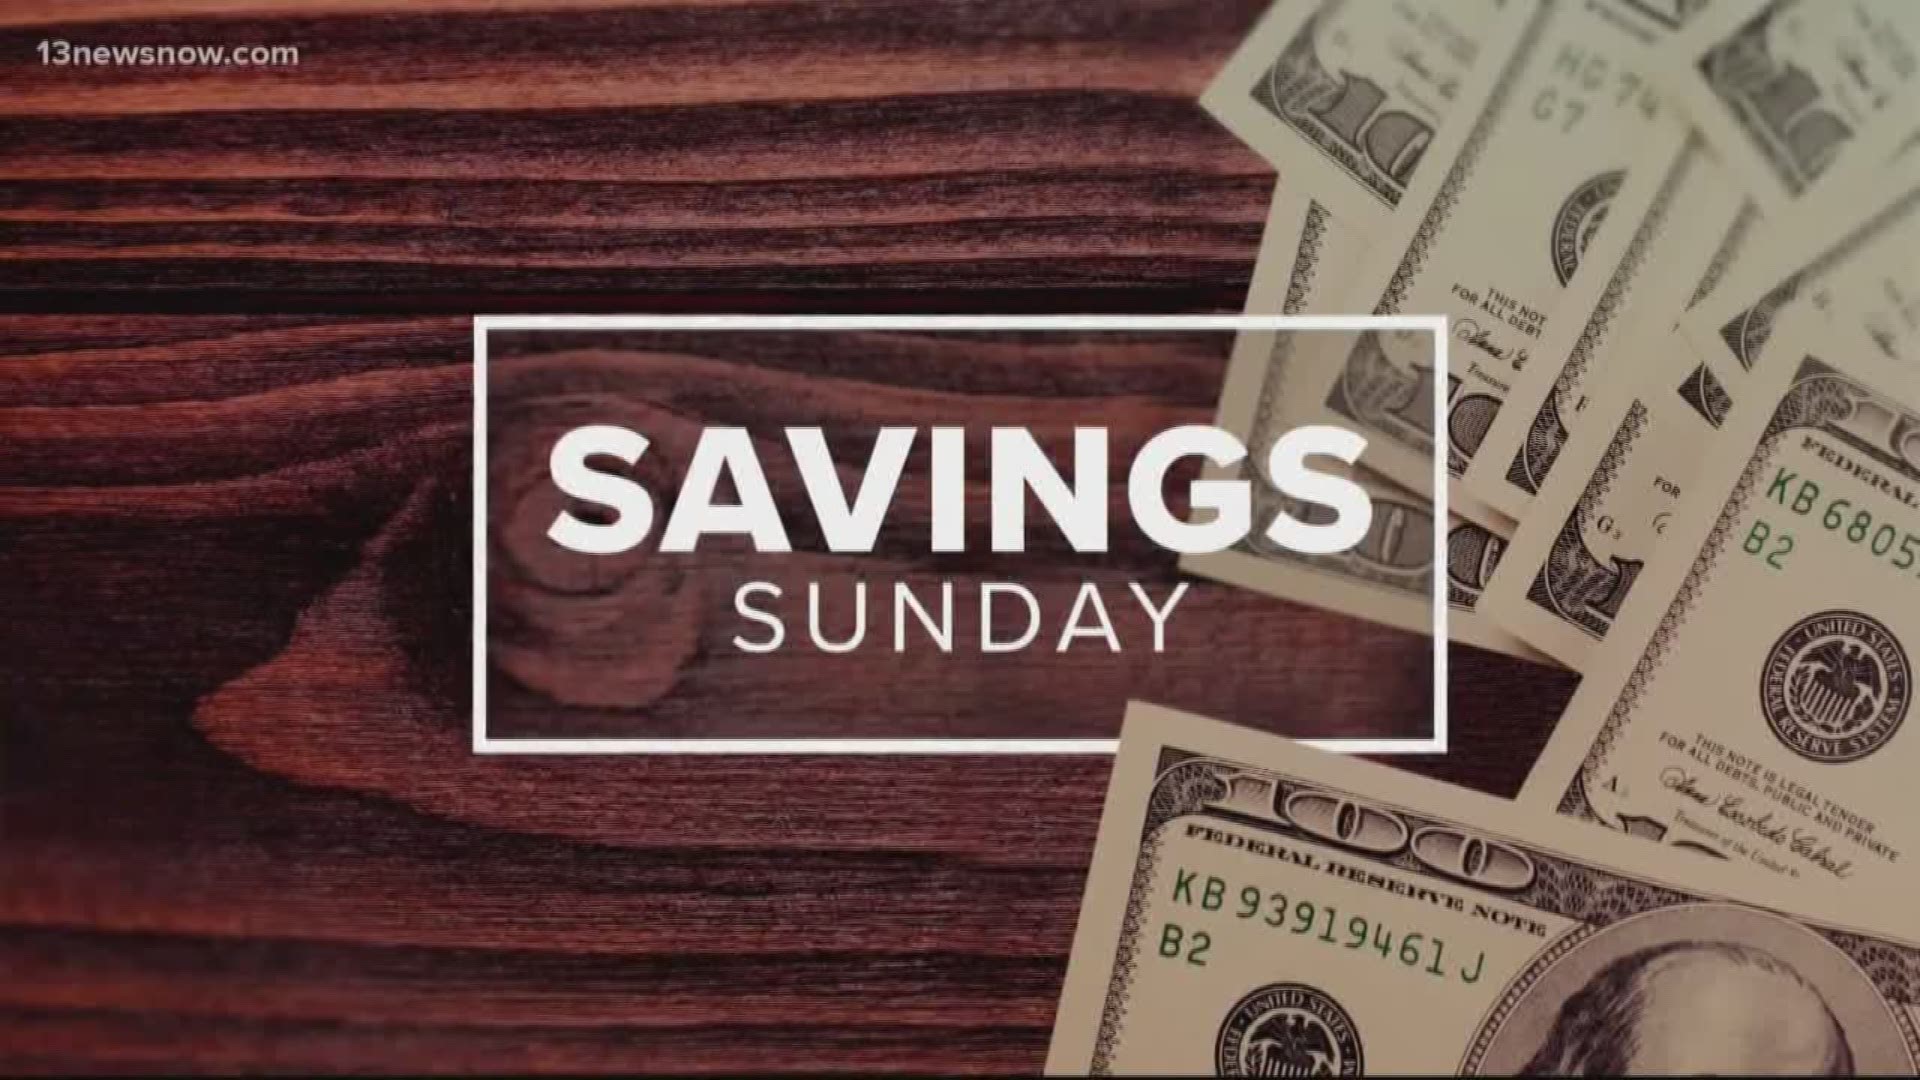 Laura Oliver from www.afrugalchick.com has your big savings for the week of July 7, 2019.